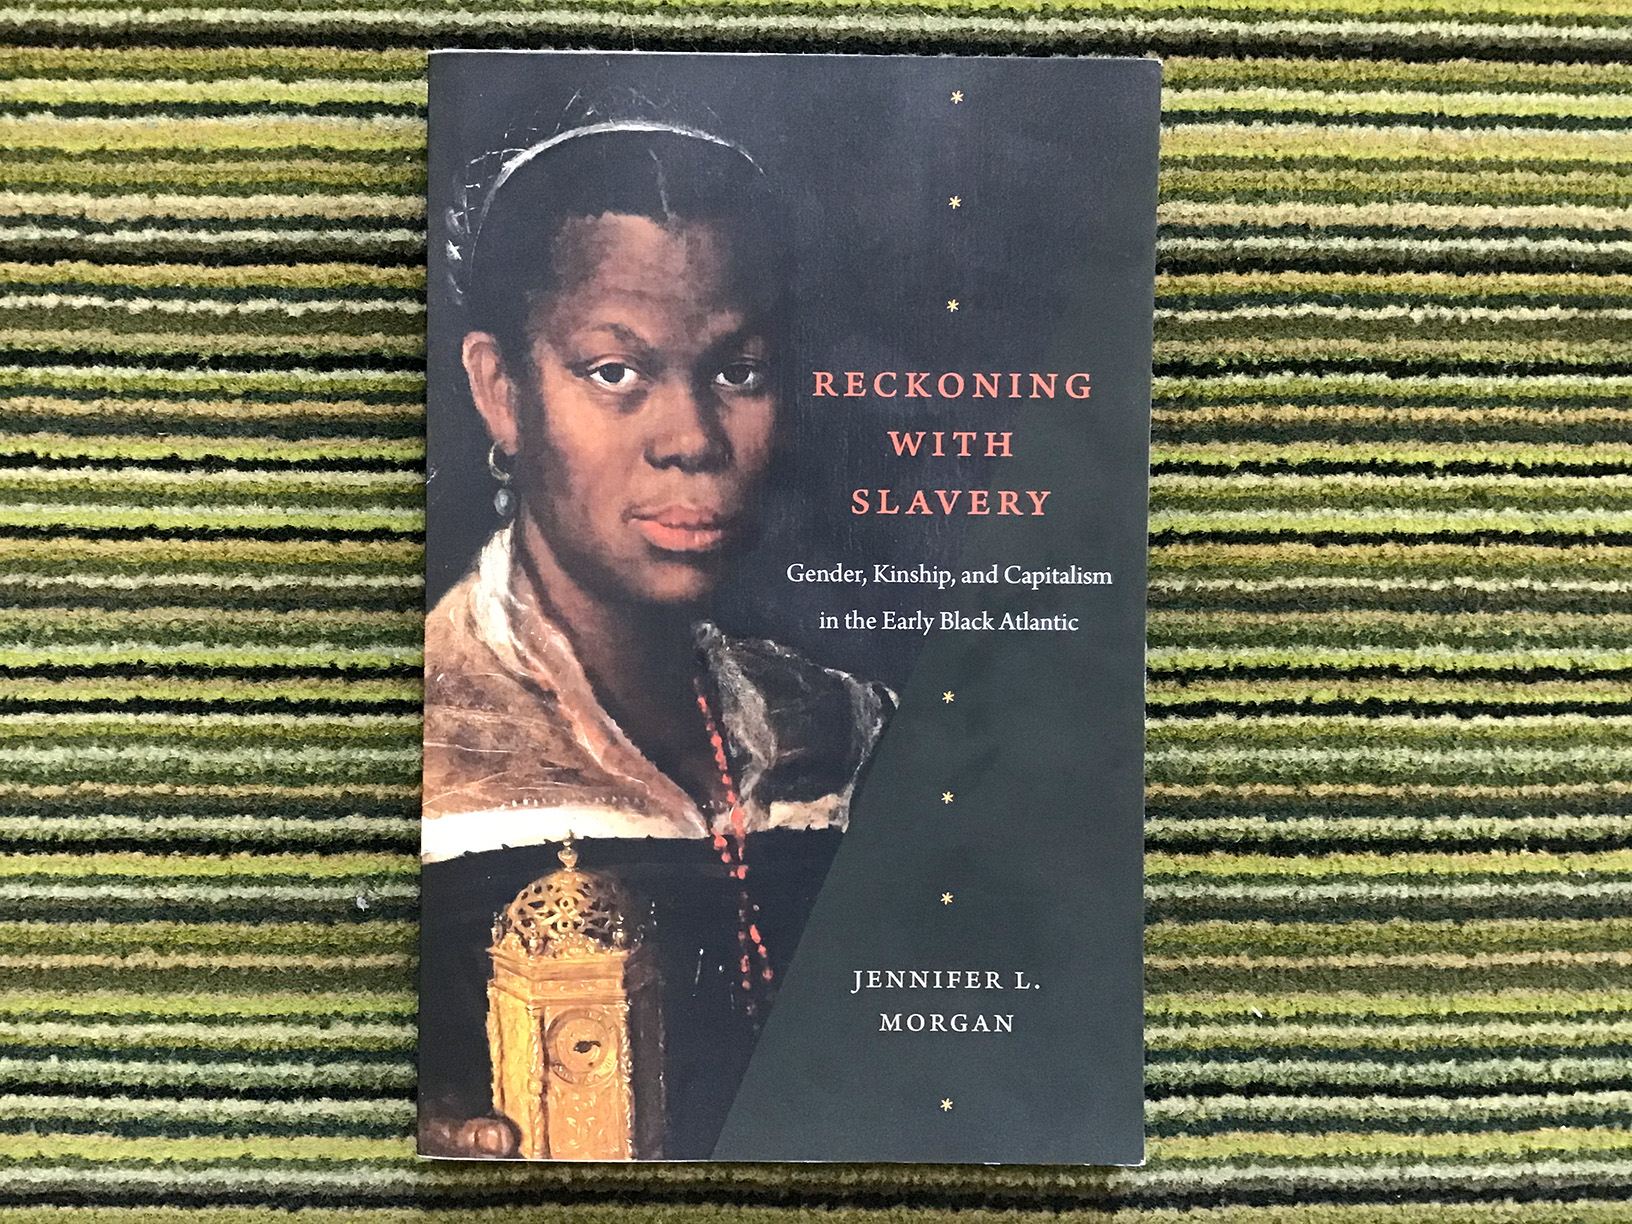 Cover image of book Reckoning with Slavery by Jennifer L. Morgan